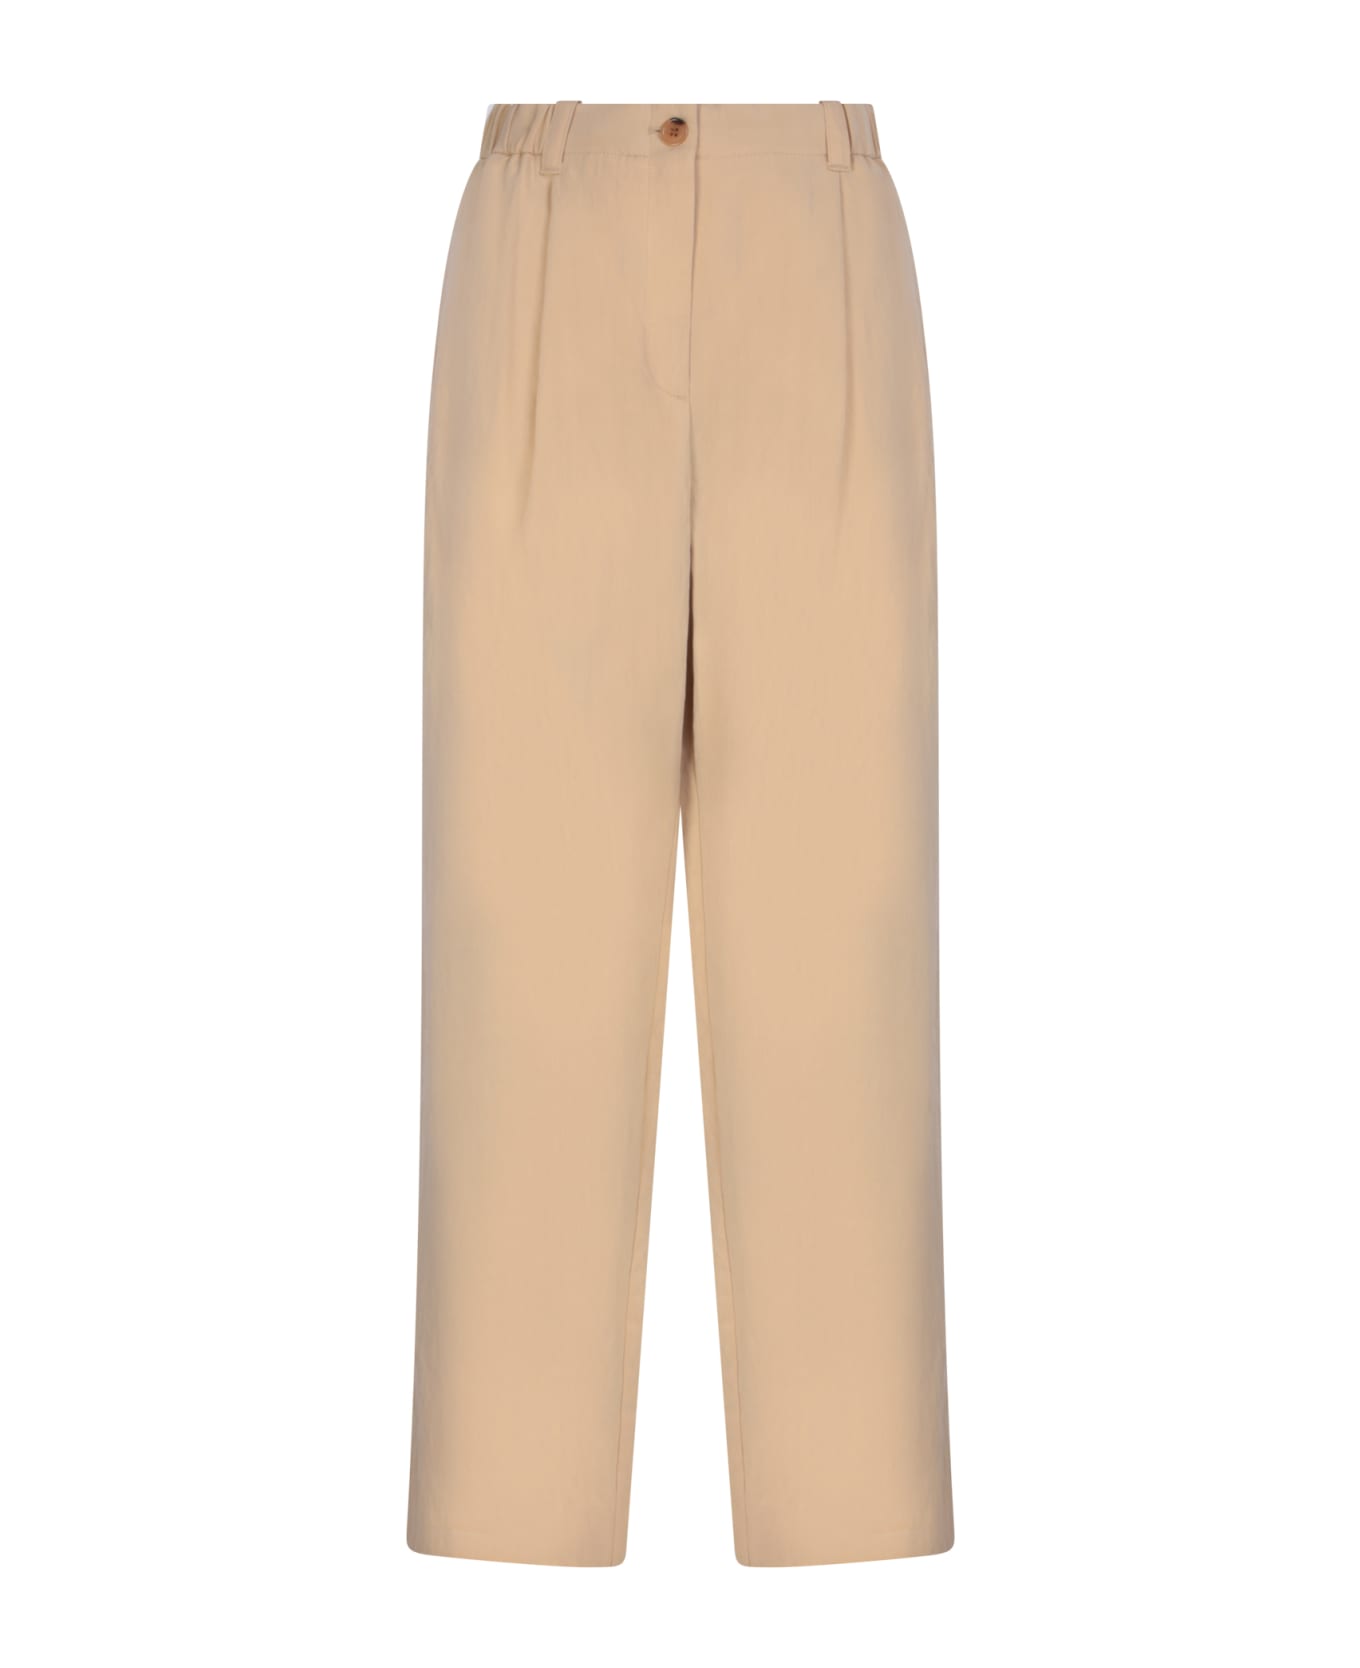 Kenzo Tailored Trousers - Beige